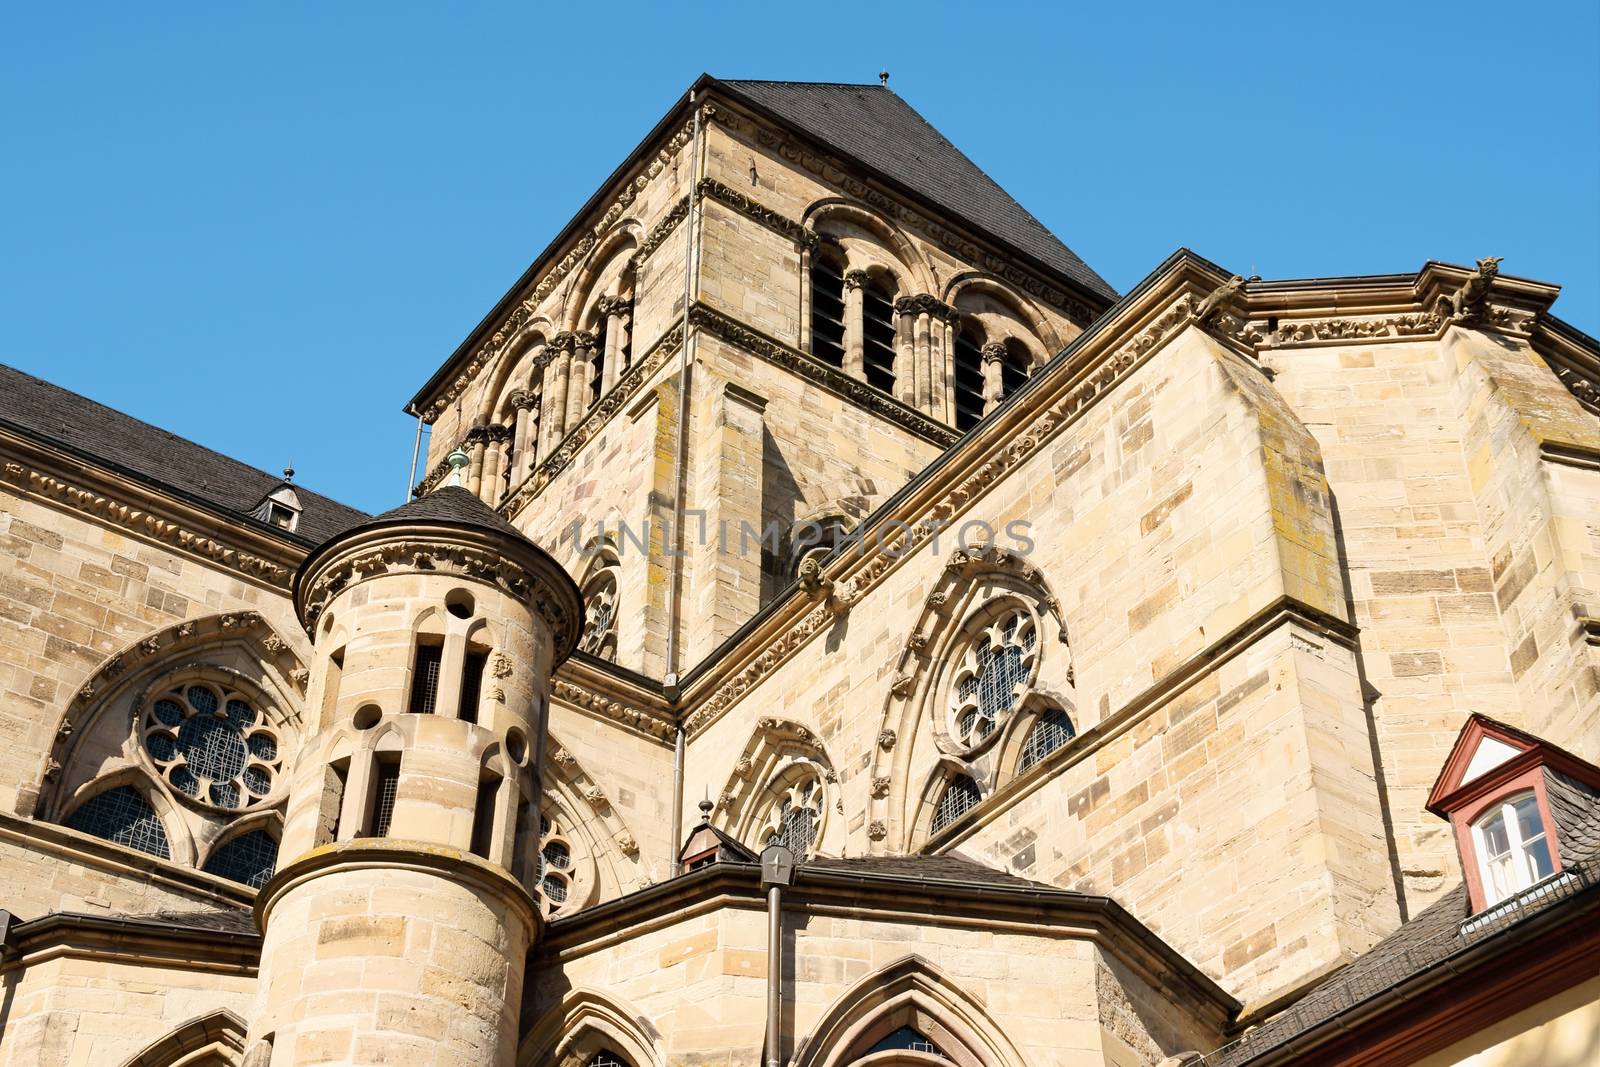 Trier Cathedral or Dom St. Peter is the oldest church in Germany. In 326 AD, Constantine, the first Christian emperor, built a church to celebrate the 20th anniversary of his reign. The style of the present church is a mixture of romanesque, gothic and baroque.